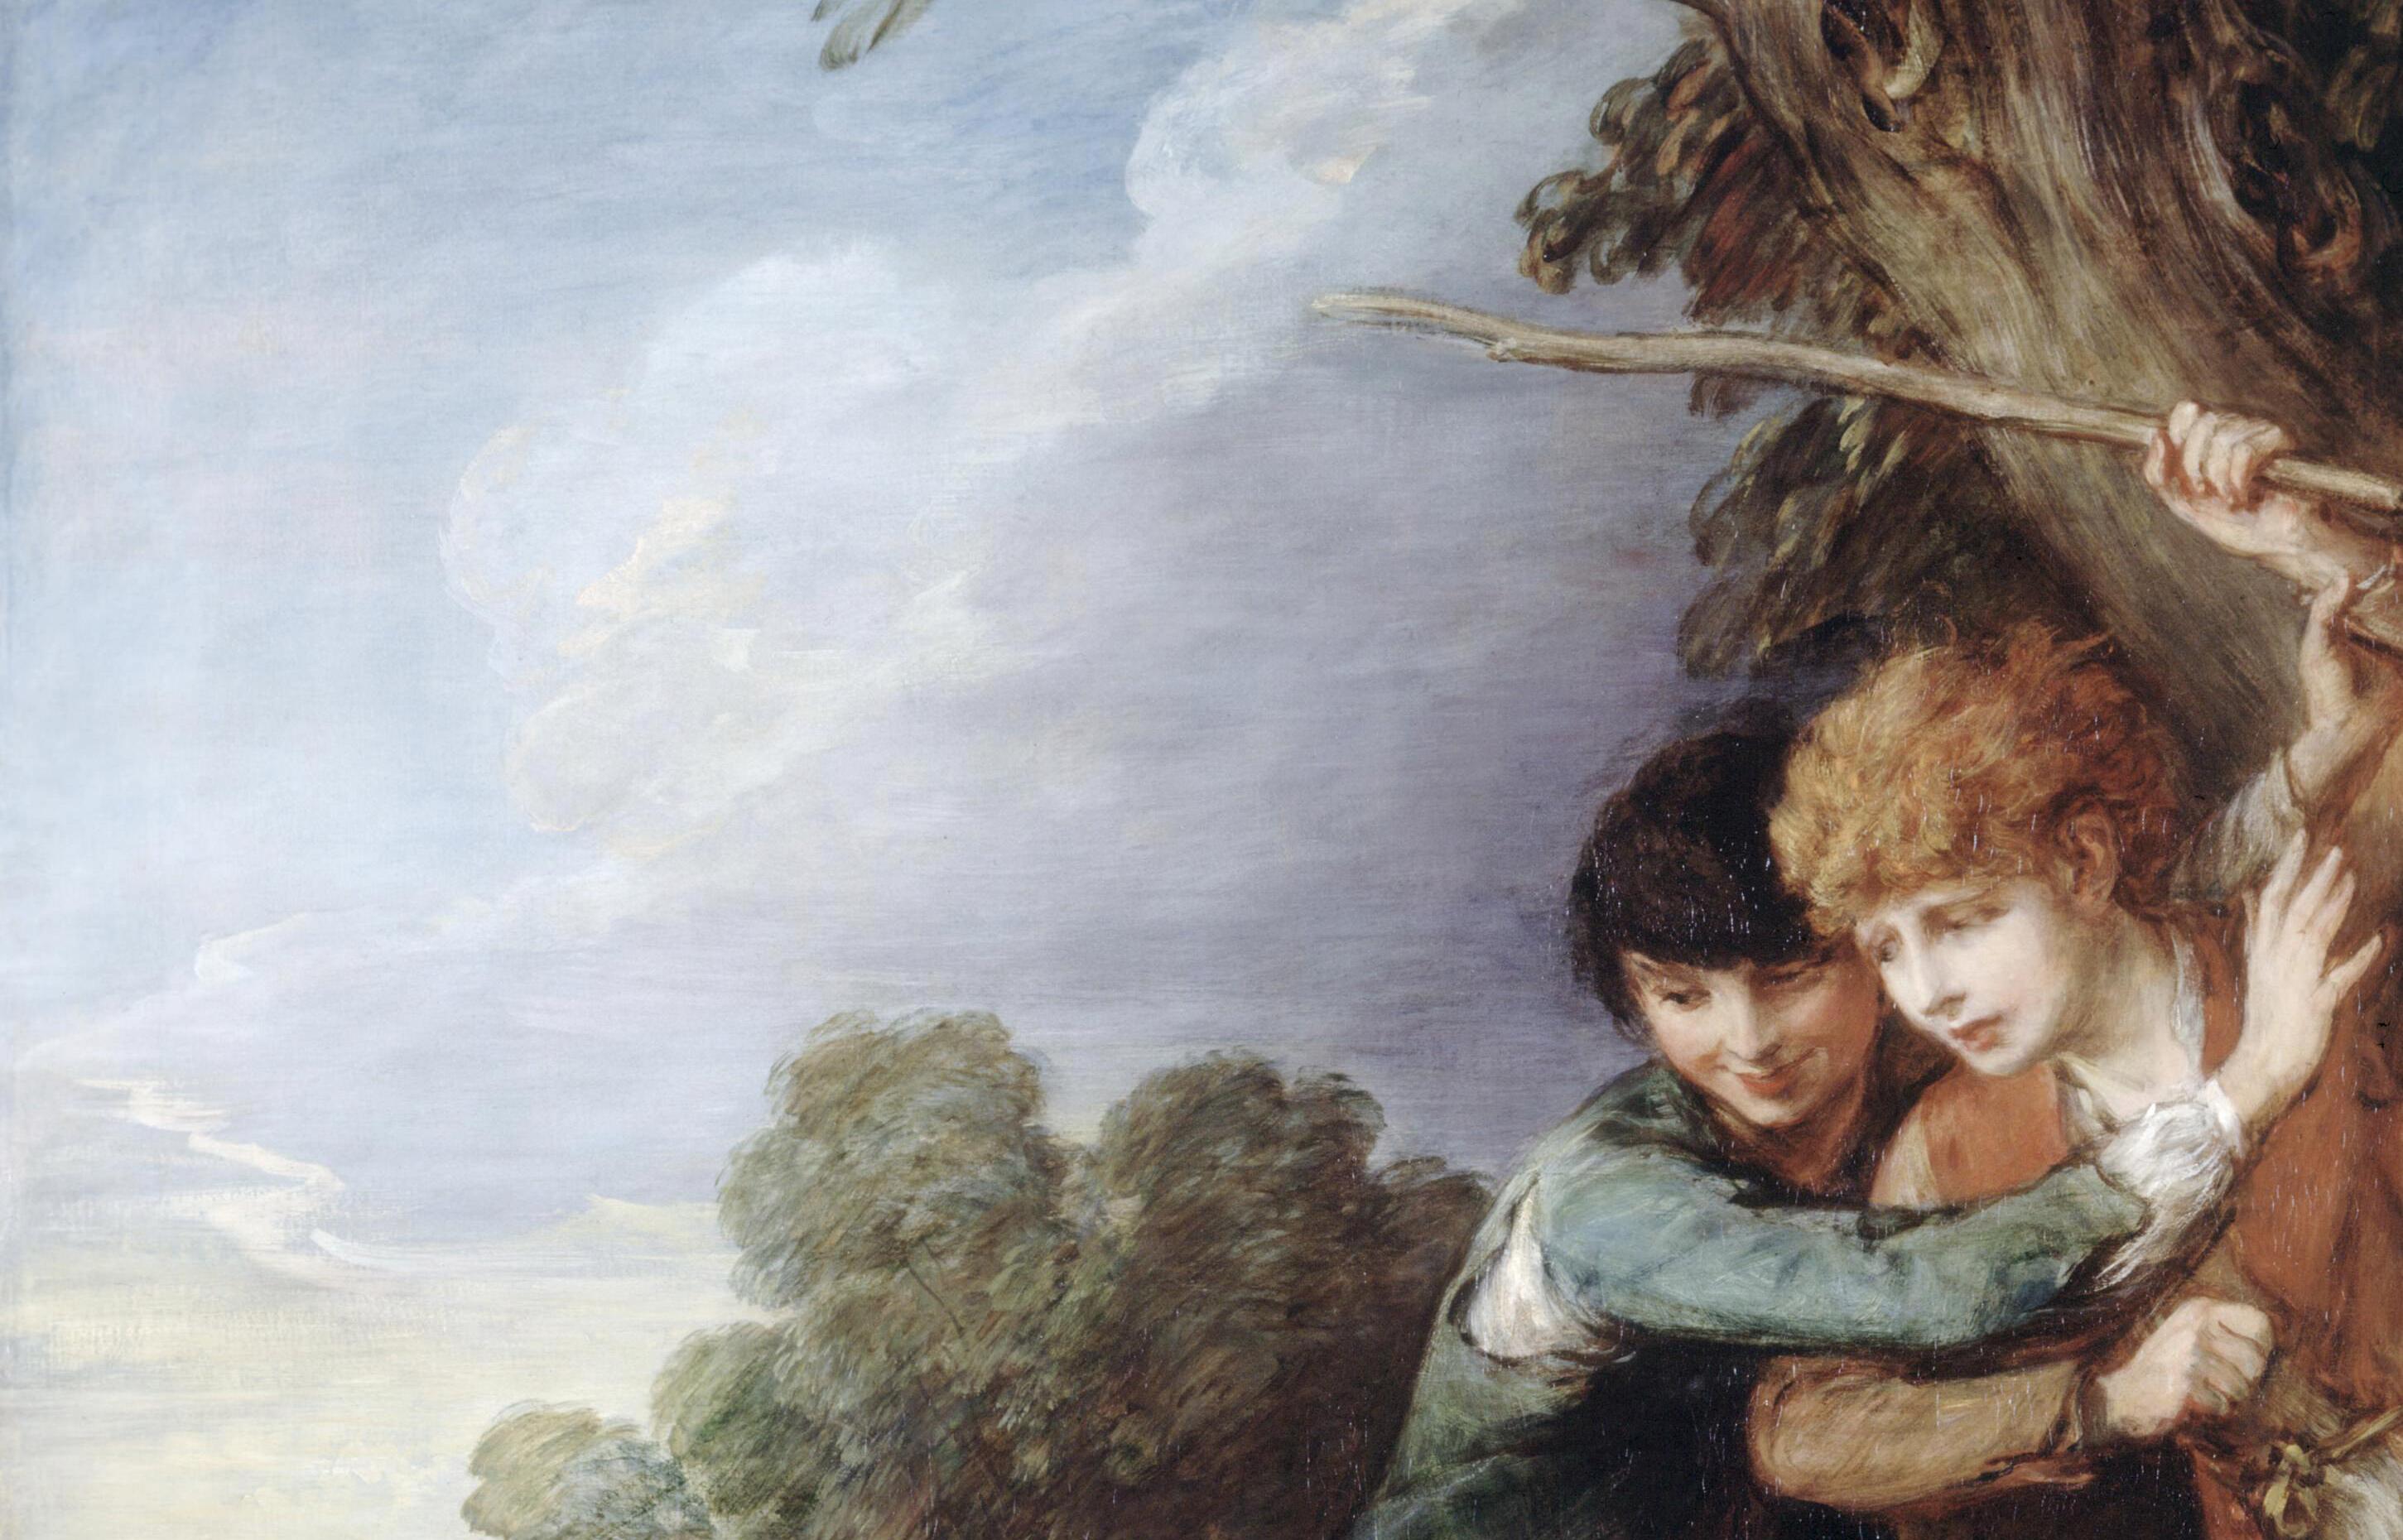 Thomas Gainsborough, <i>Two Shepherd Boys with Dogs Fighting</i>, 1783, oil on canvas, 222.5 x 155.1 cm. Collection of Kenwood House, London / Historic England (88028787). Digital image courtesy of Historic England | Bridgeman Images (All rights reserved).